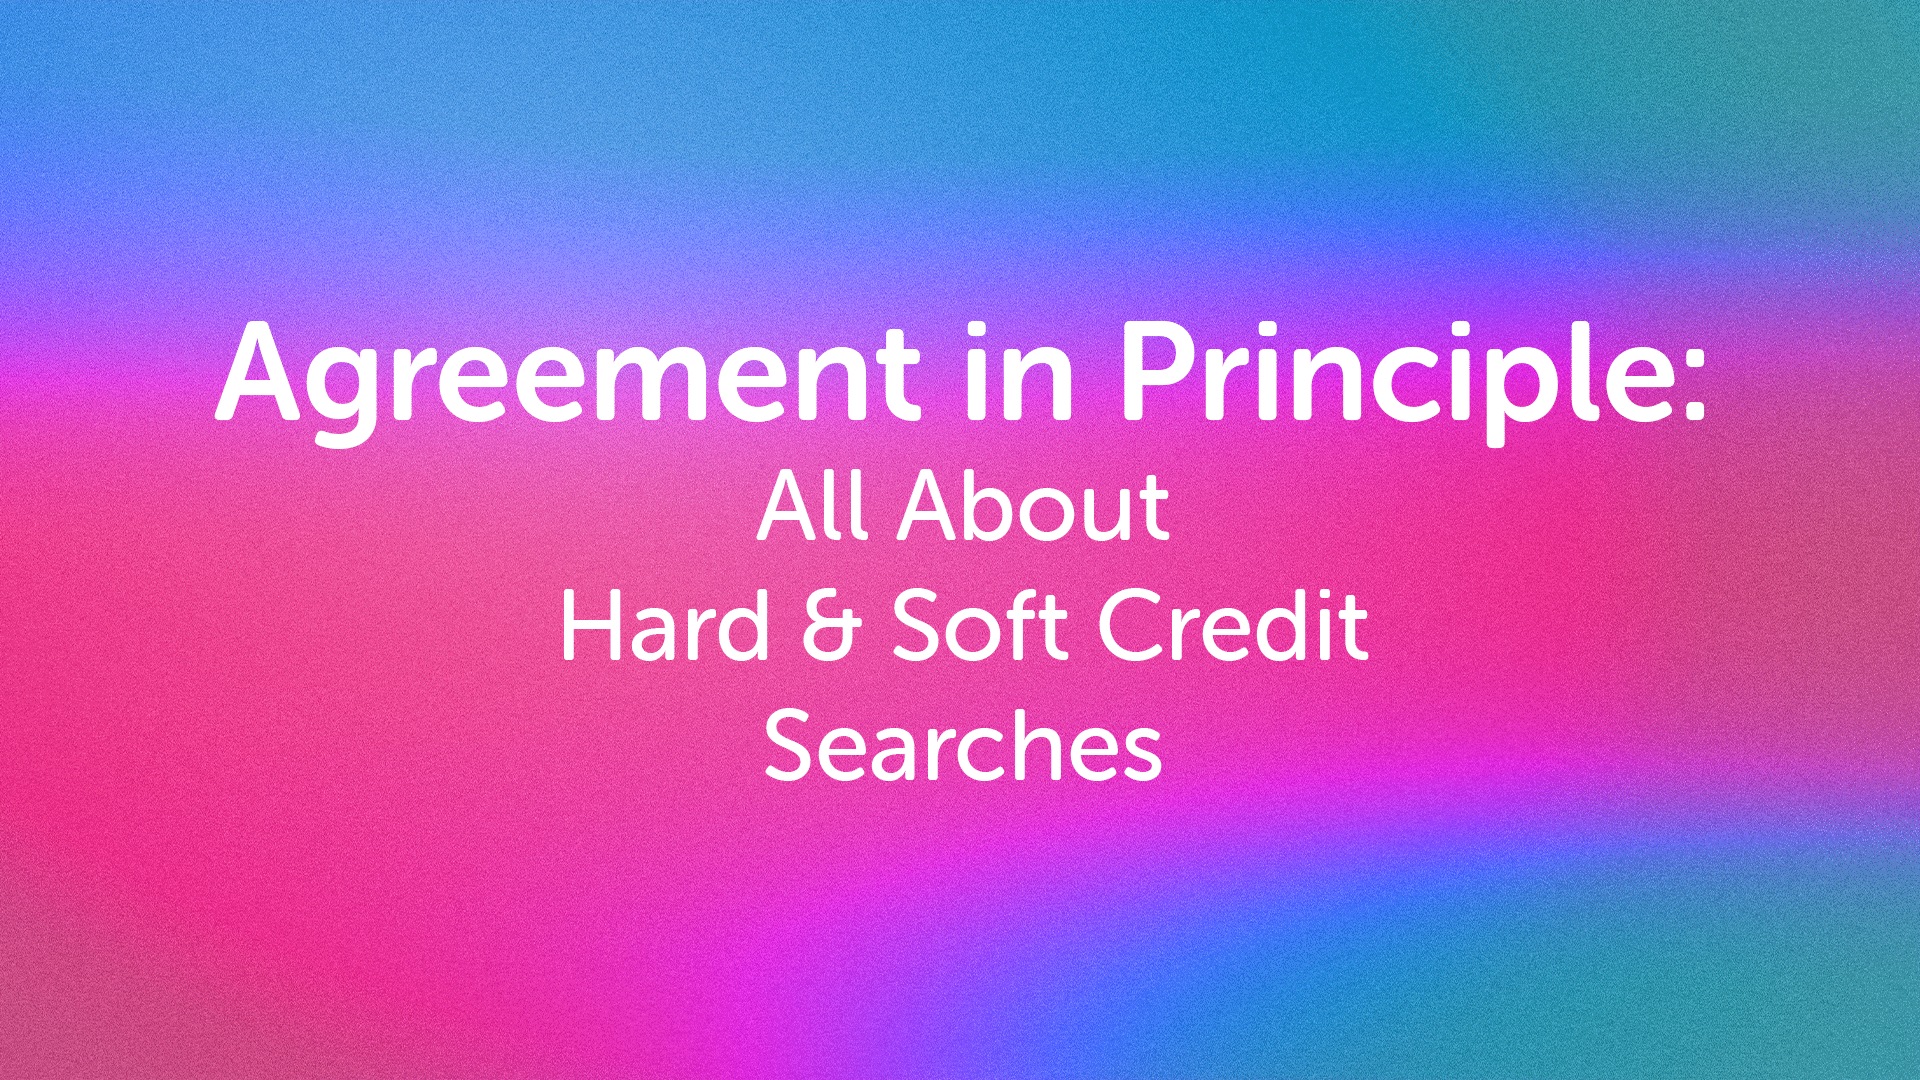 Agreement in Principle and Soft Credit Searches in Birmingham